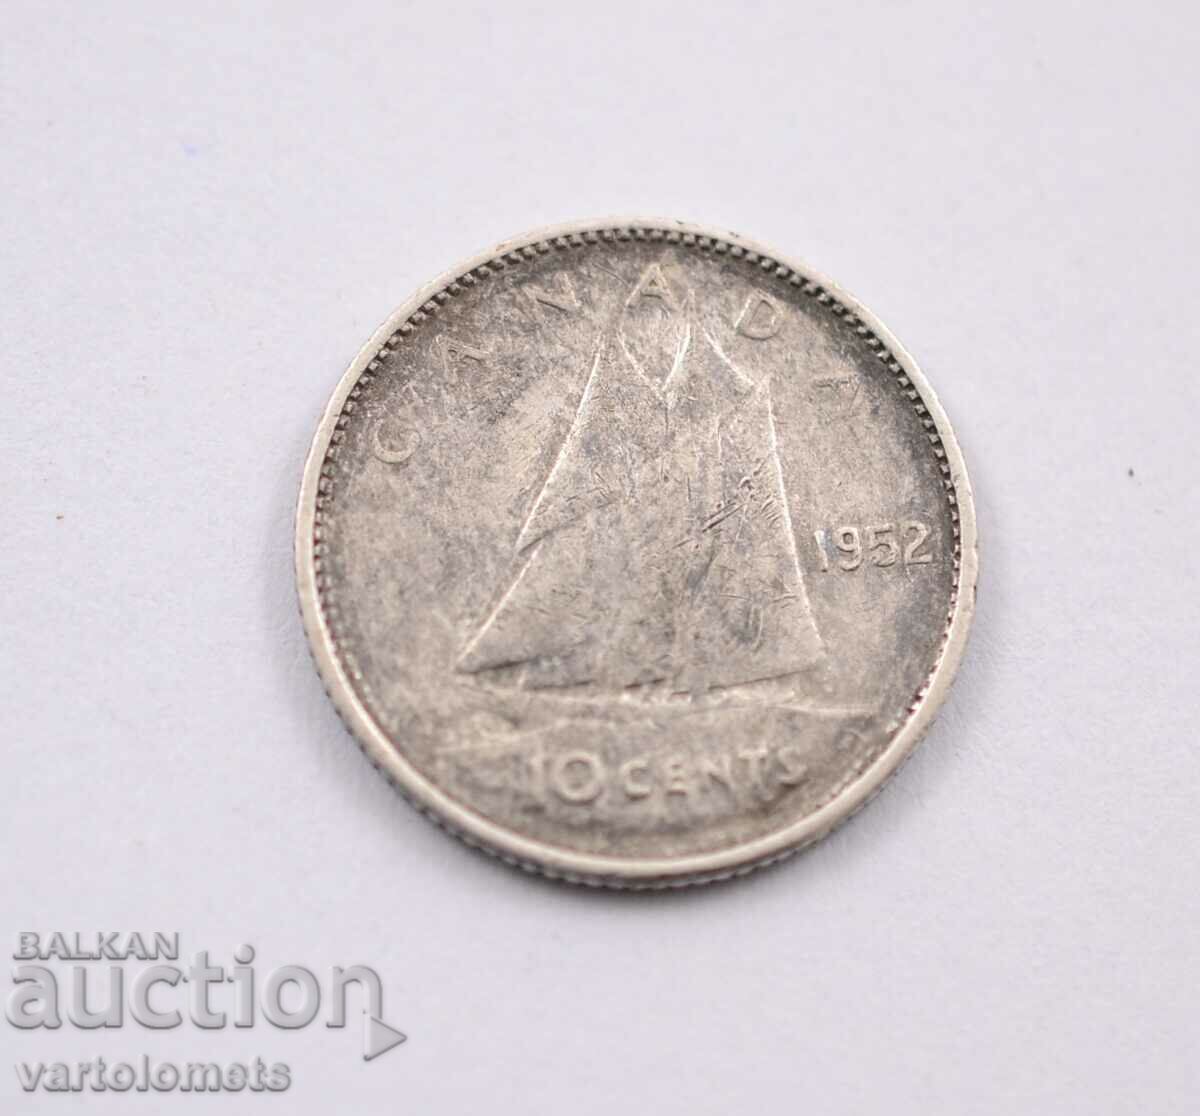 10 cents, 1952 - Canada, Silver 0.800, 2.33g, ø 18.03mm